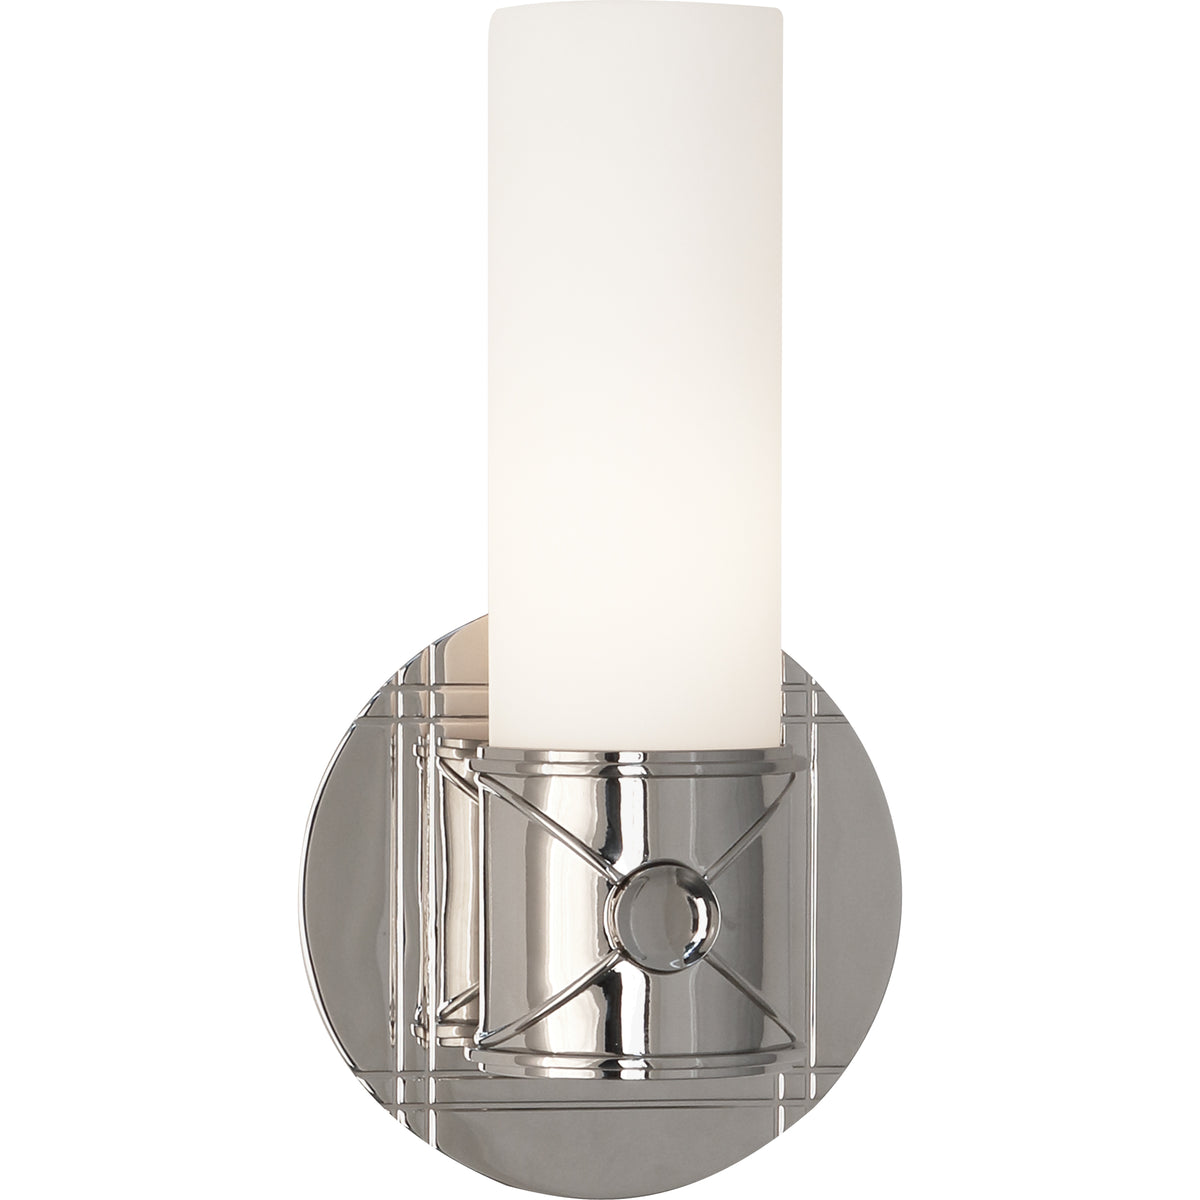 Jonathan Adler Maxime Wall Sconce by Robert Abbey